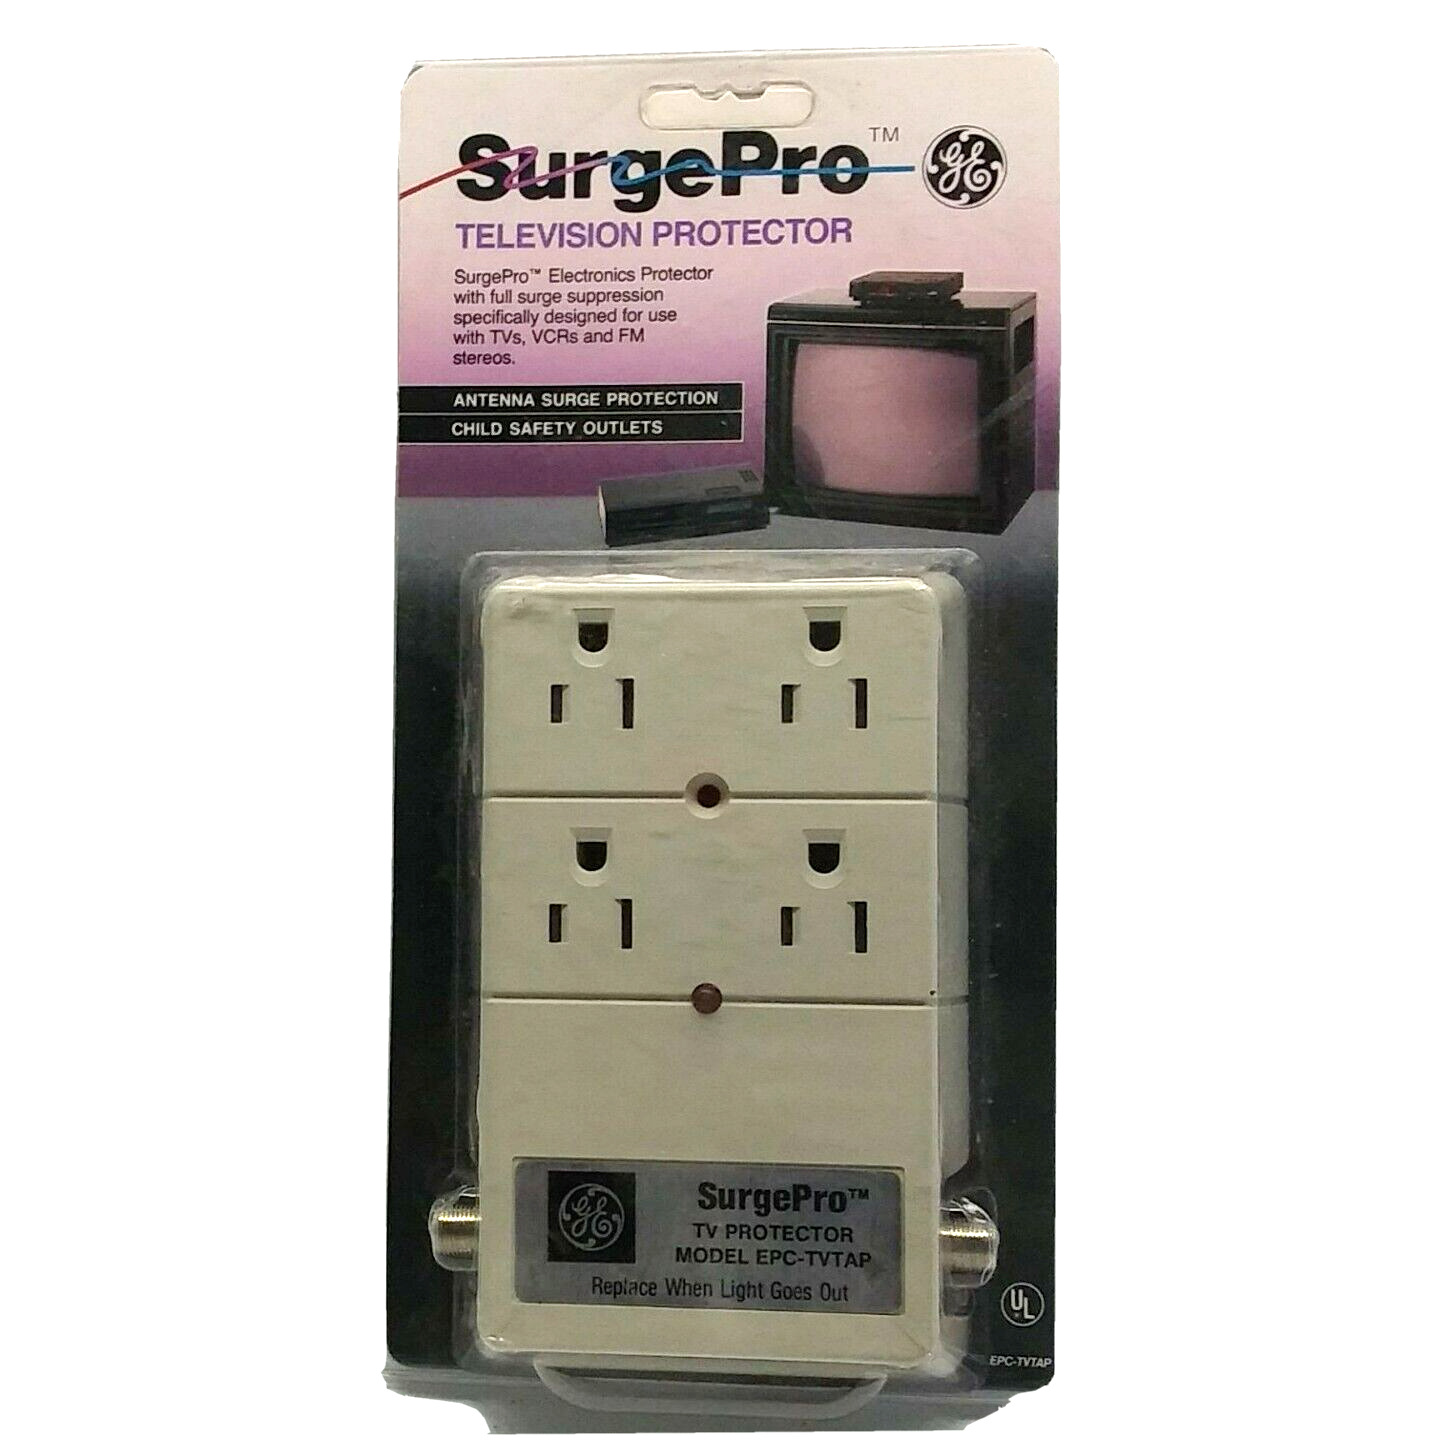 1987 GE Surge Pro Television Surge Protector Coaxial For Older TV VCR Stereo's